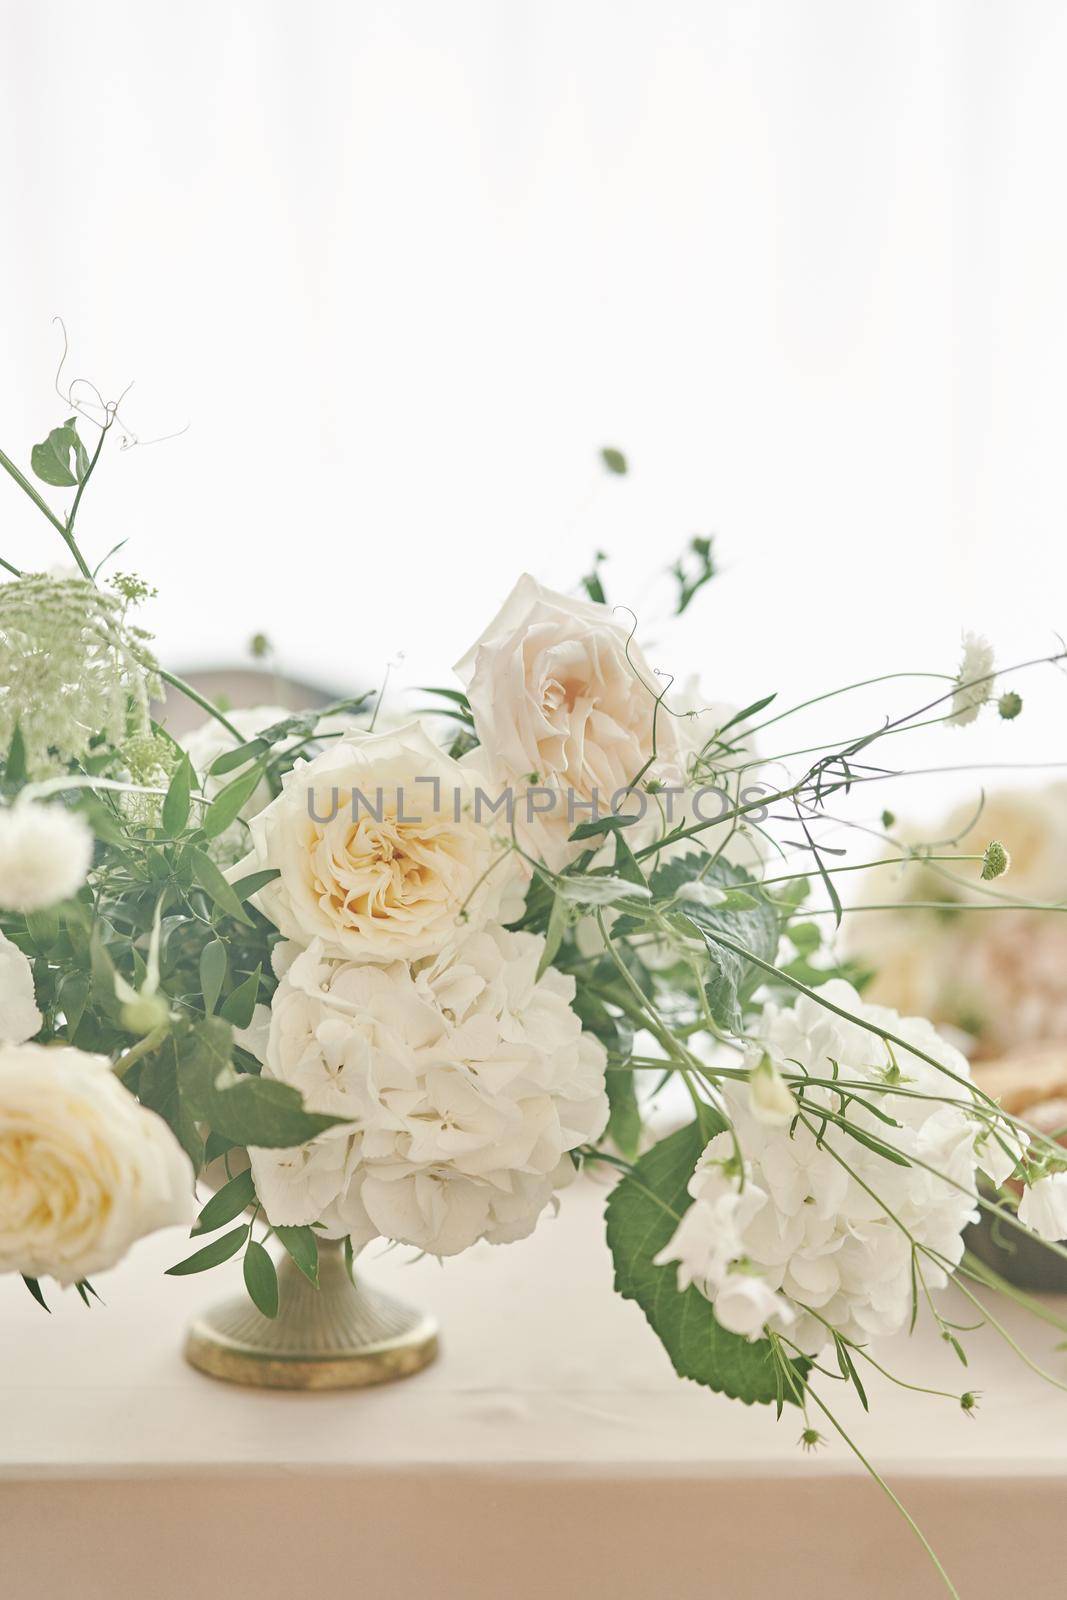 Wedding decorations. Flowers in a vase. Decoration of a wedding celebration. Close-up